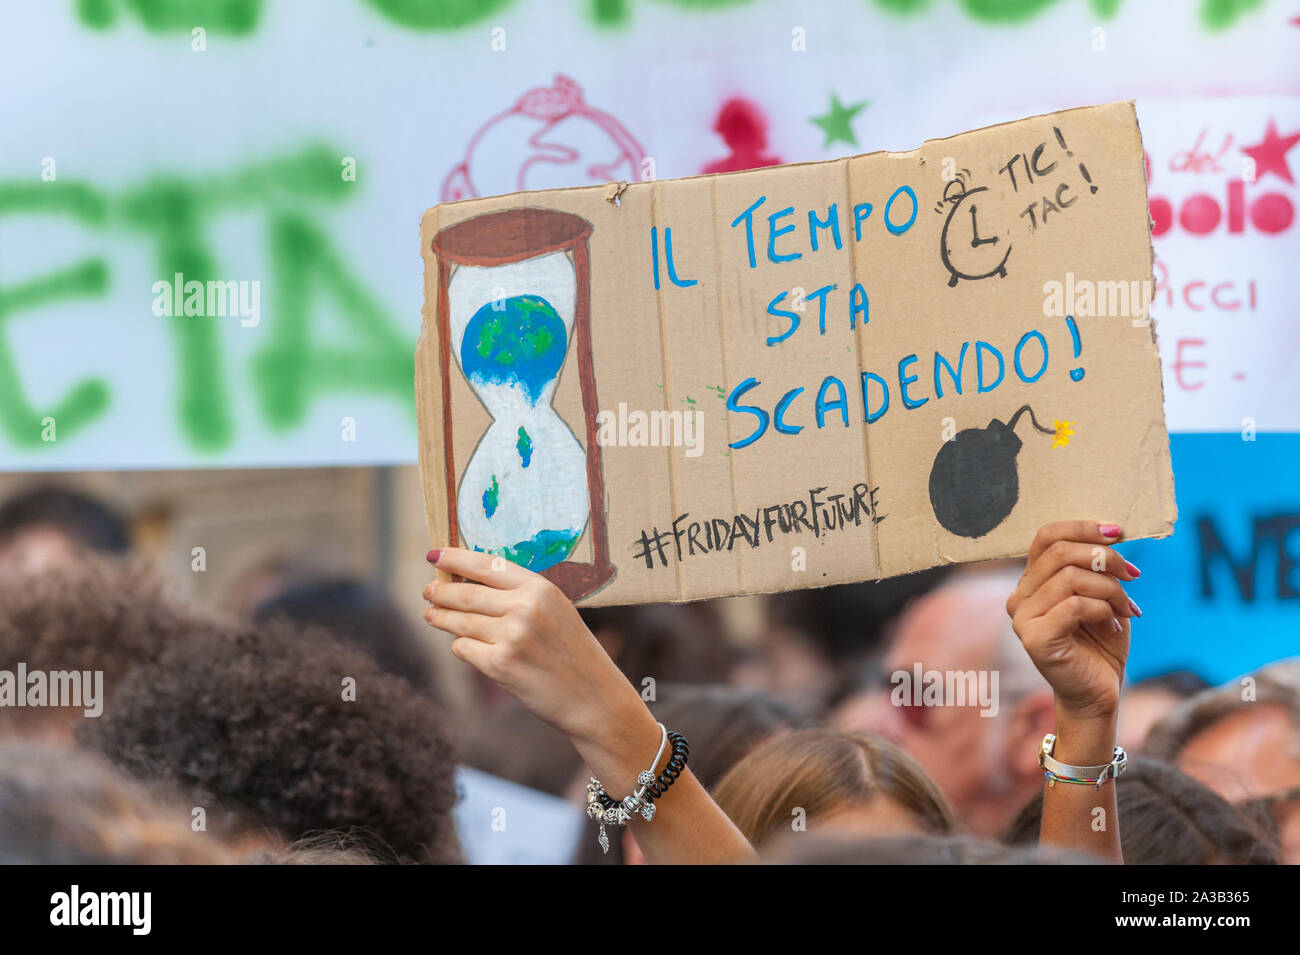 School strike for climate; time is ending board;  friday for future;  Lecce 27 september 2019 Stock Photo